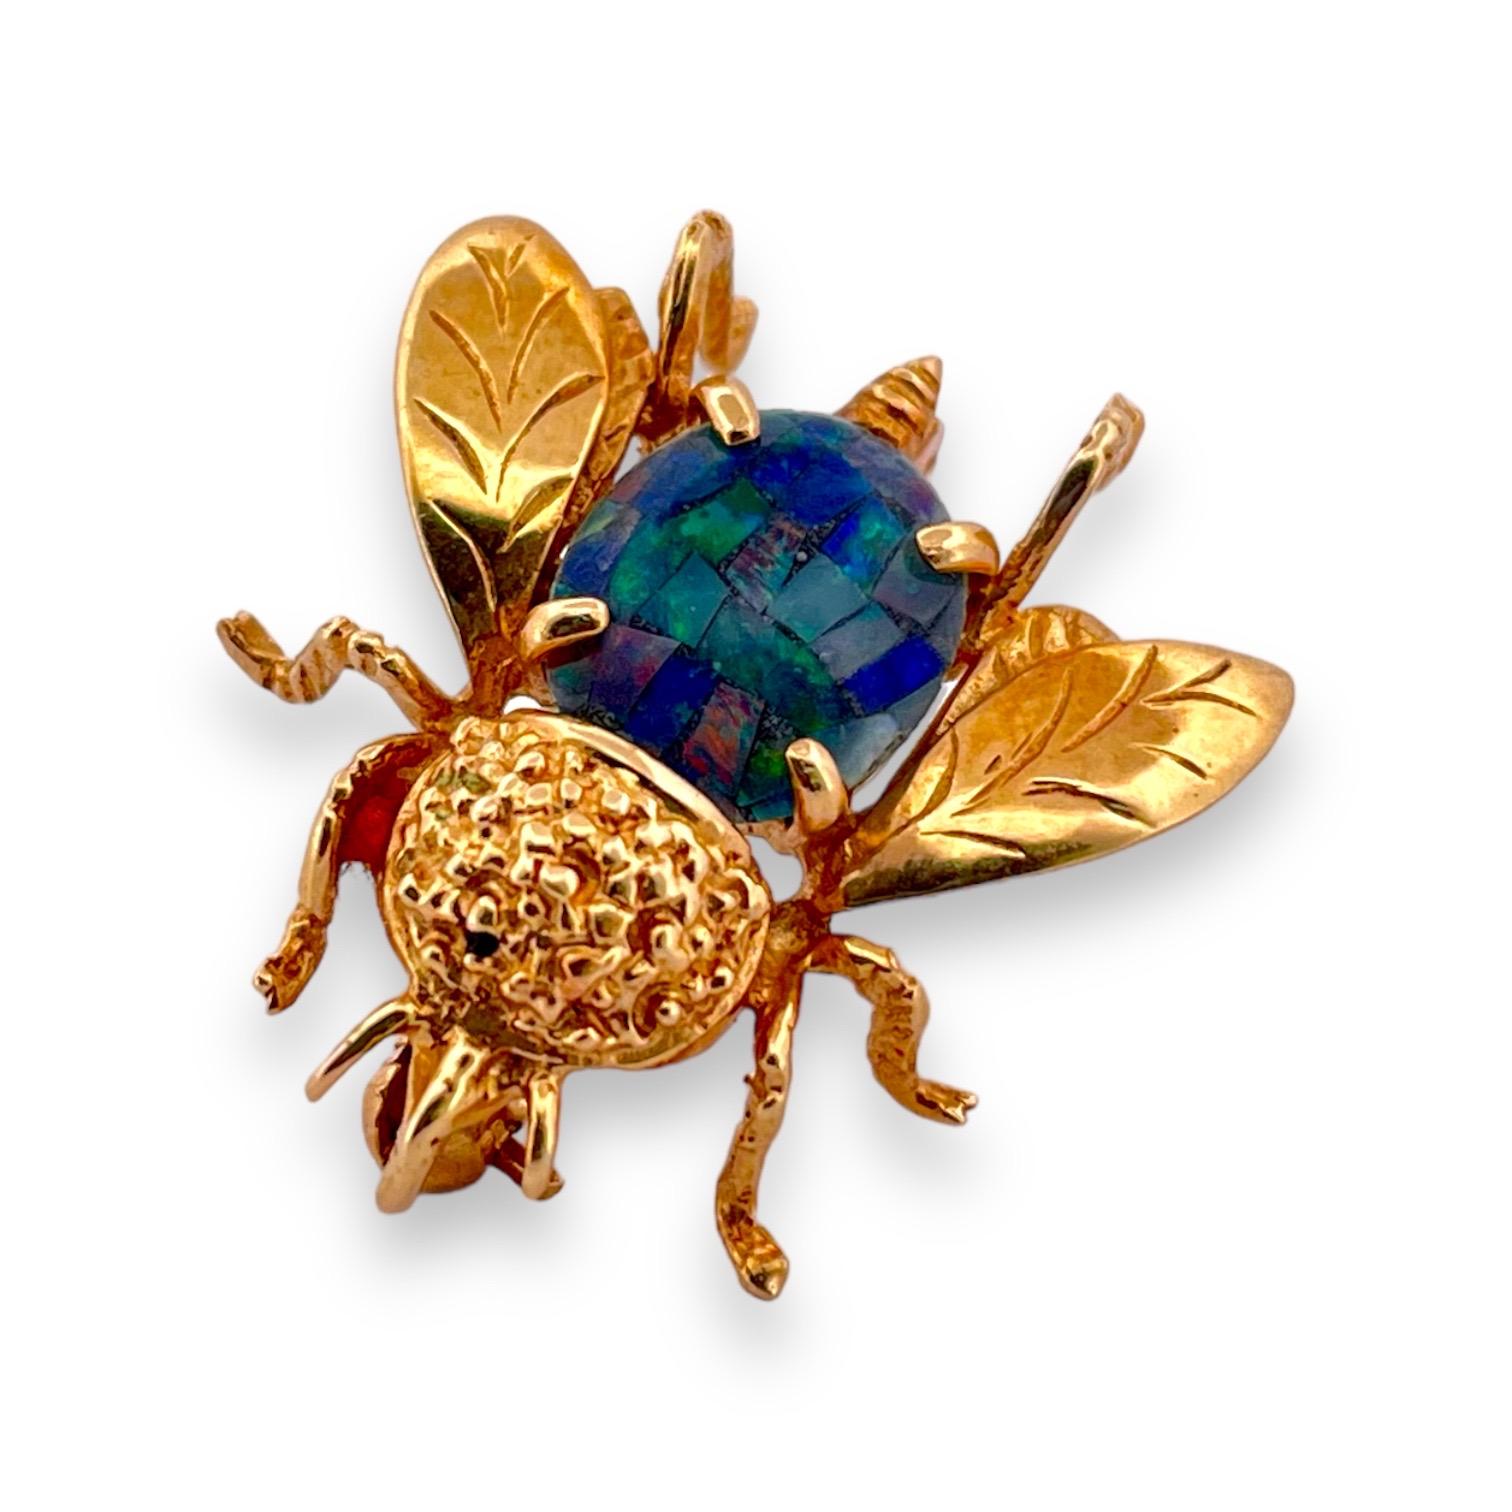 Embrace nature's splendor with this Whimsical Boulder Opal Bee Brooch, finely wrought in the warm embrace of 14K yellow gold. Weighing 2.82 grams, the centerpiece of this enchanting brooch is a vibrant boulder opal, capturing the iridescent magic of